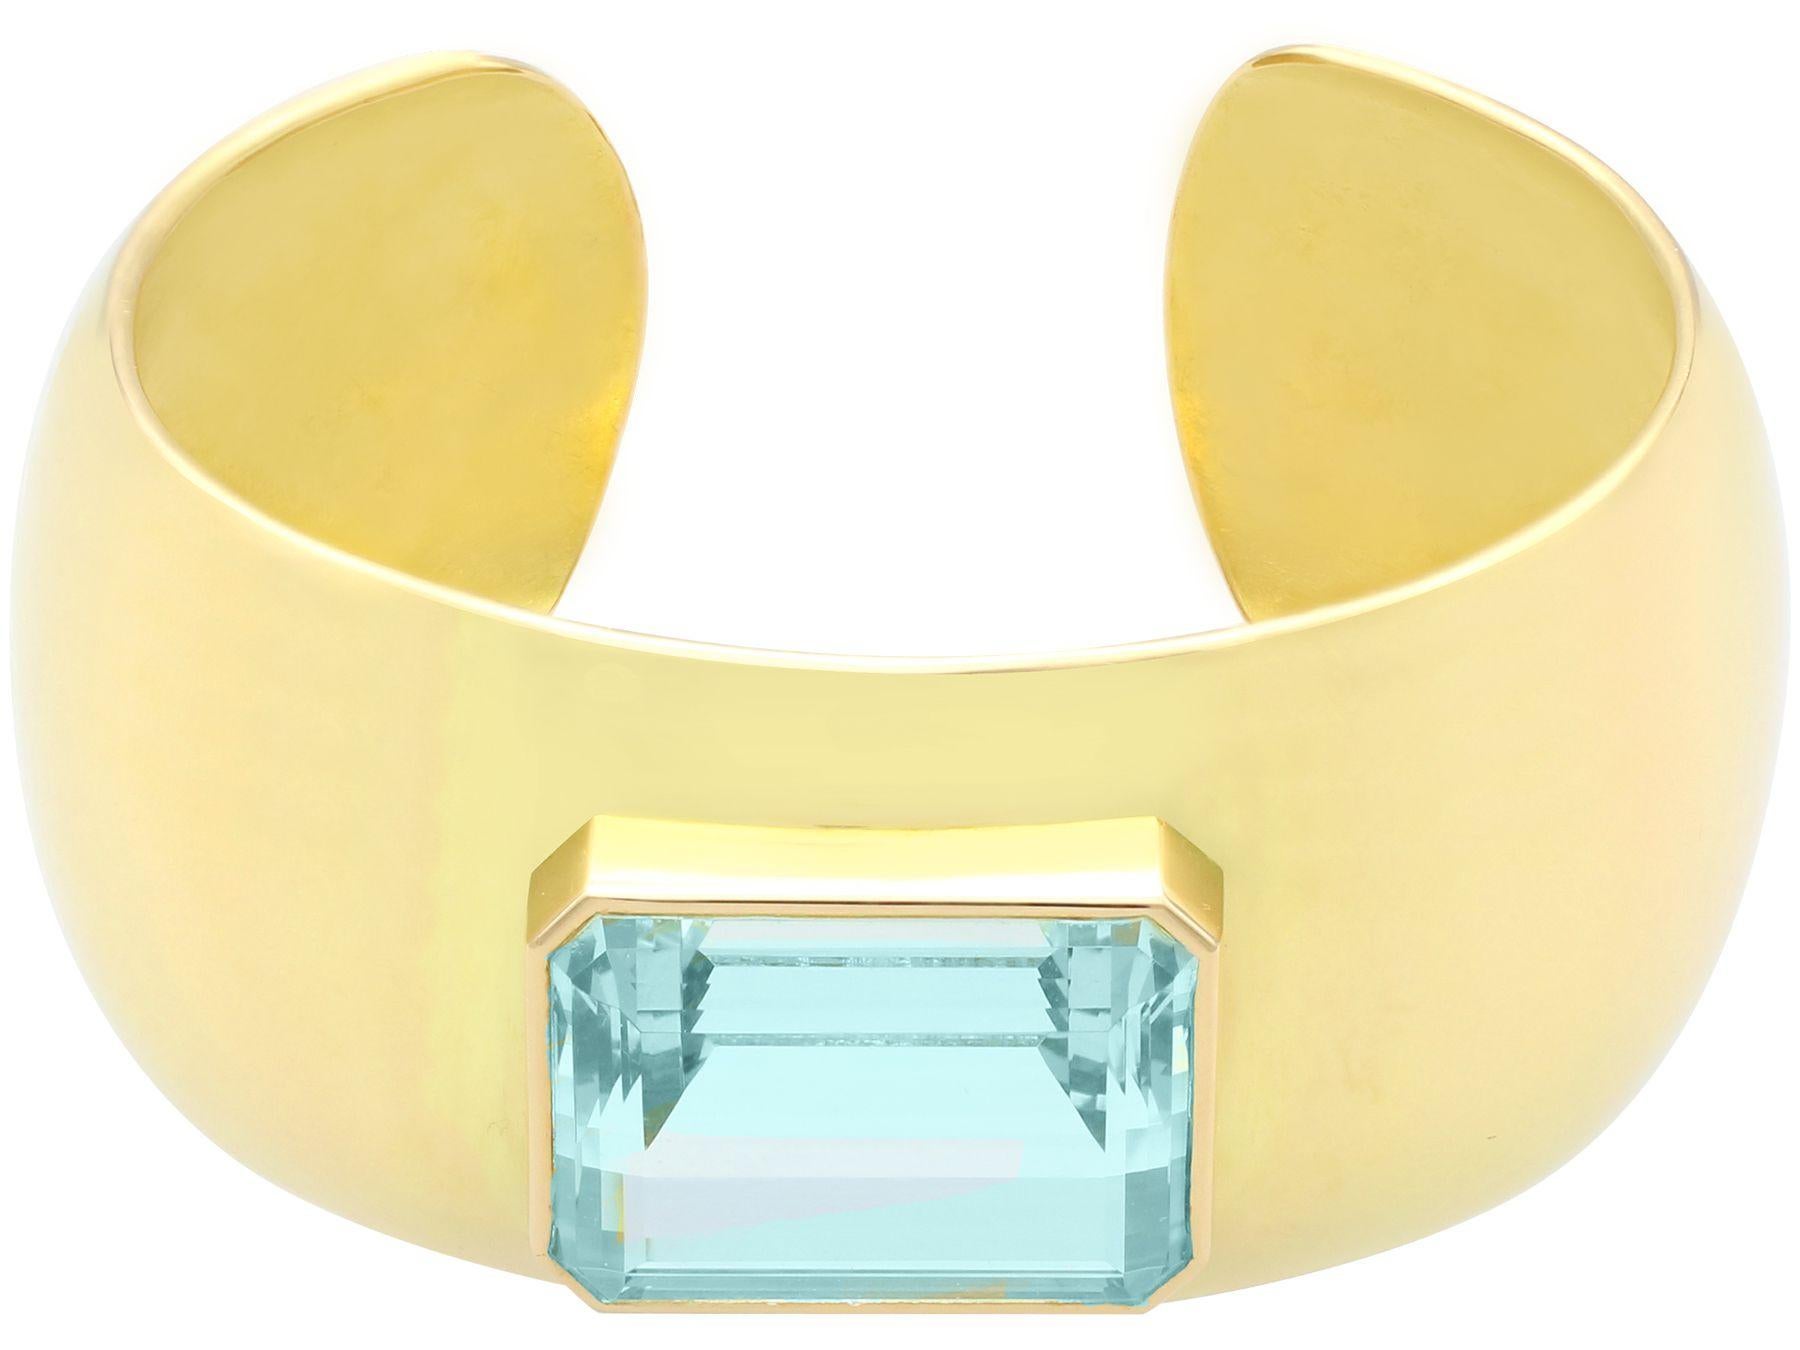 A stunning, fine and impressive vintage 40.35 carat aquamarine and 18 karat yellow gold cuff bangle; part of our bangle and bracelet collection.

This stunning, fine and impressive vintage aquamarine bangle has been crafted in 18k yellow gold.

The